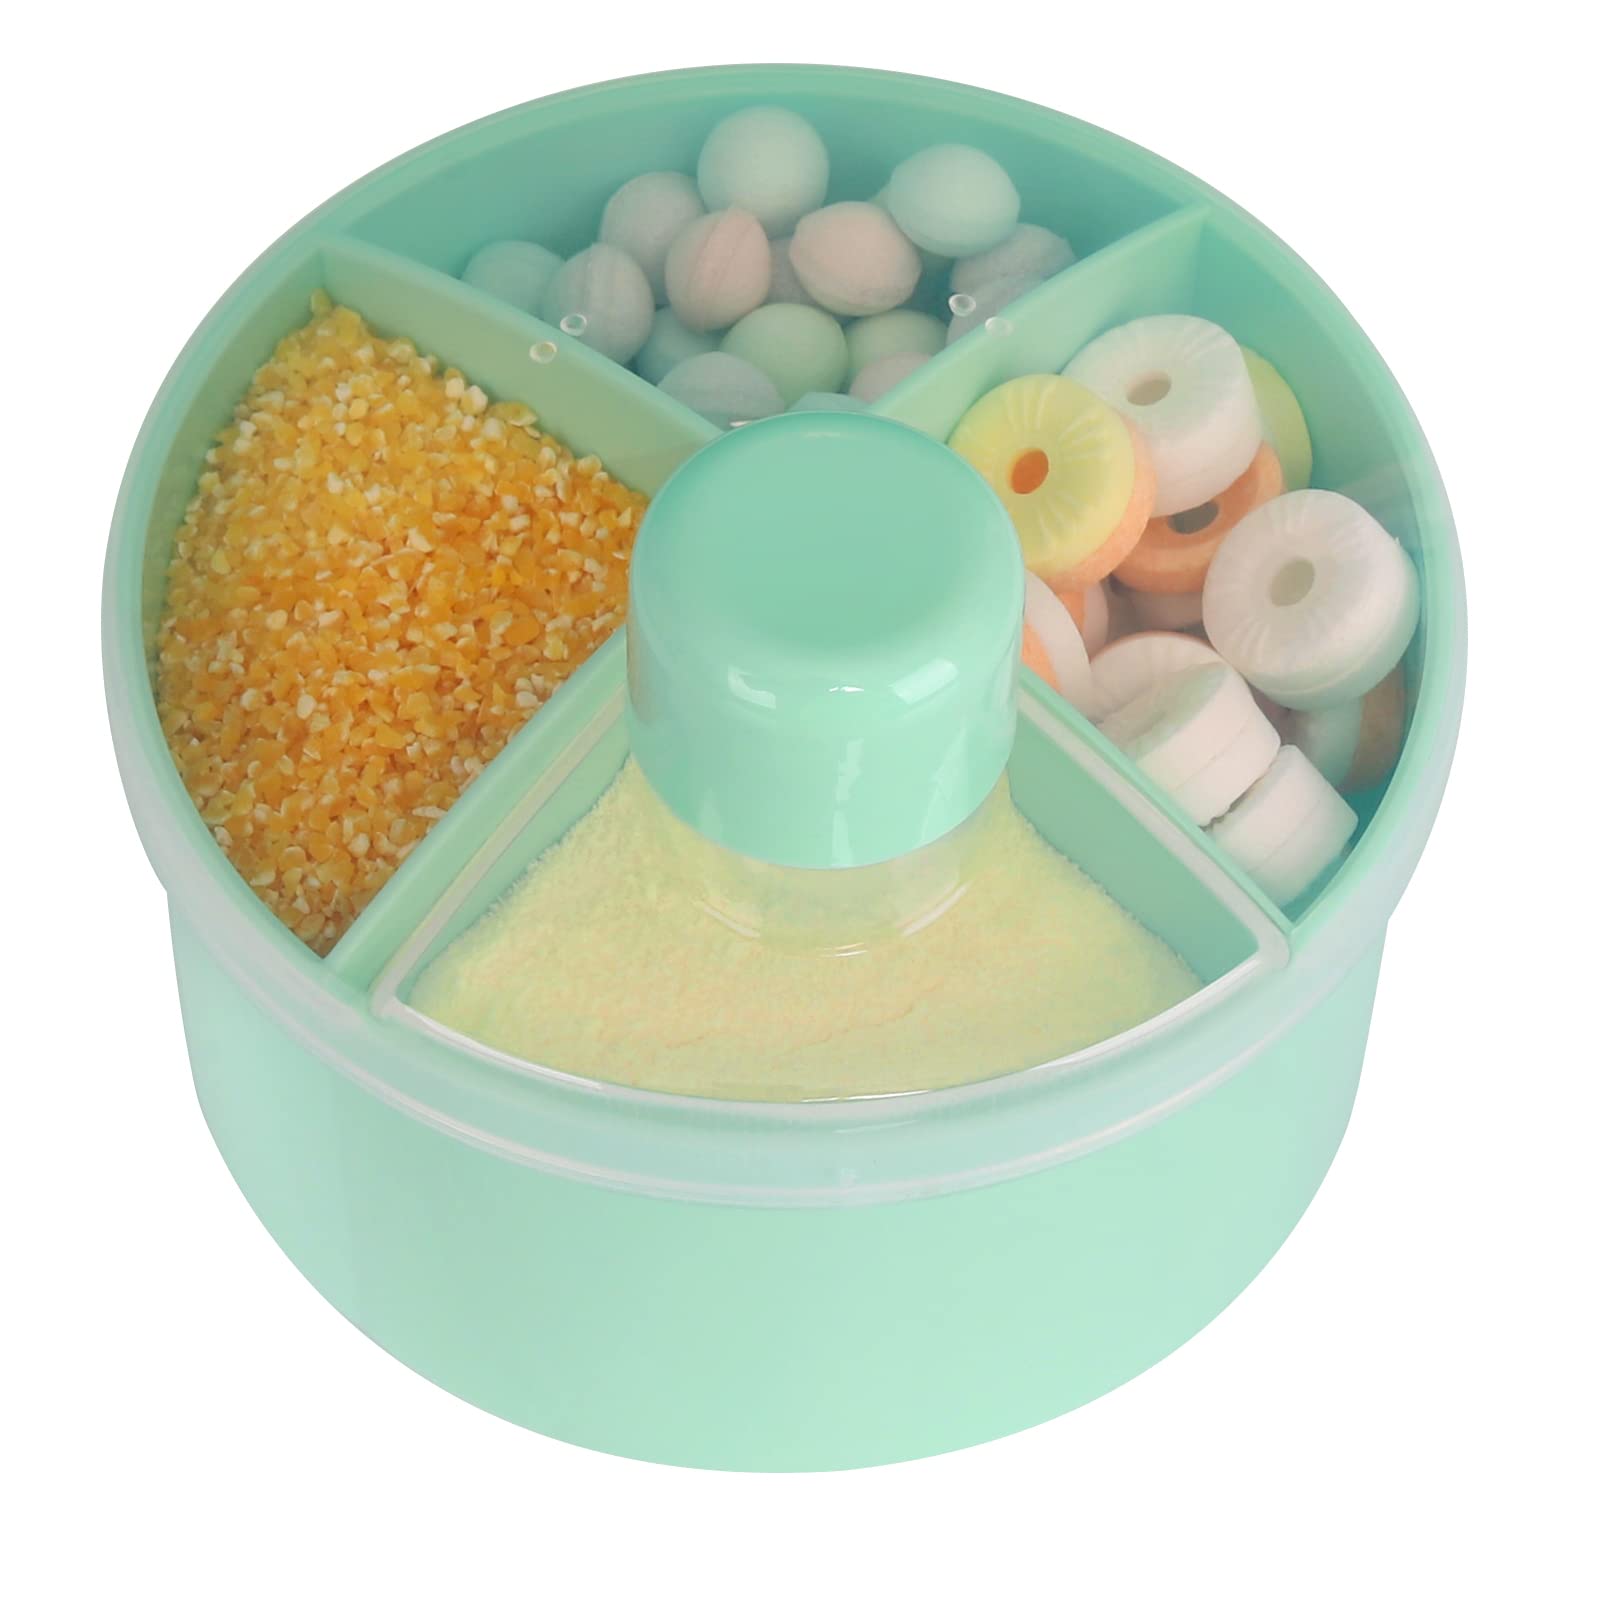 Accmor Baby Milk Powder Formula Dispenser, Formula Dispenser On The Go, Non-Spill Rotating Four-Compartment Formula Dispenser and Snack Storage Container for Infant Toddler Travel Outdoor